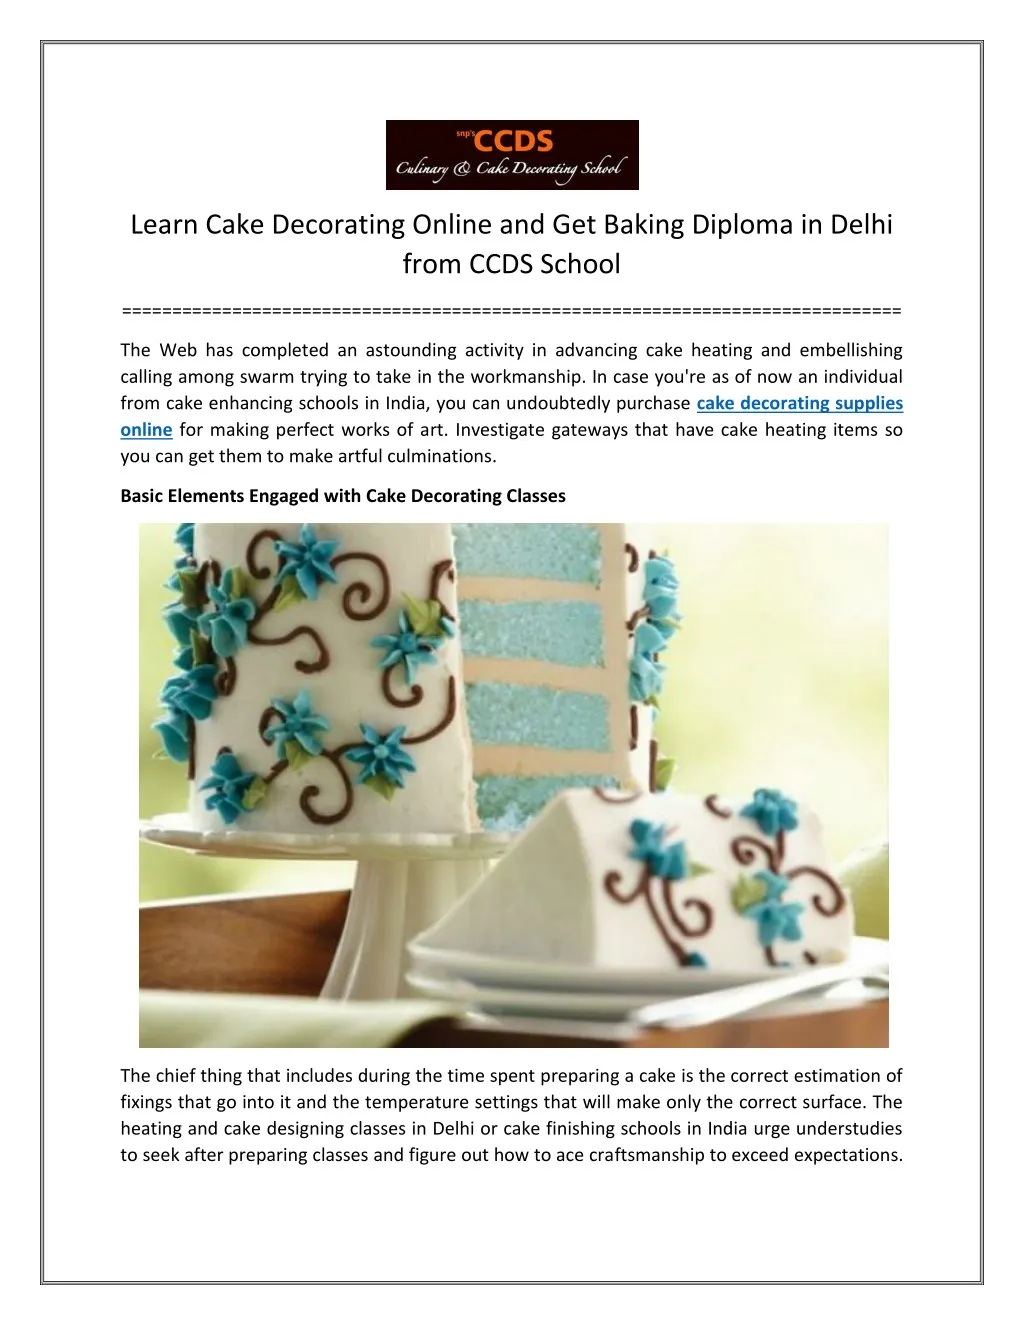 learn cake decorating online and get baking